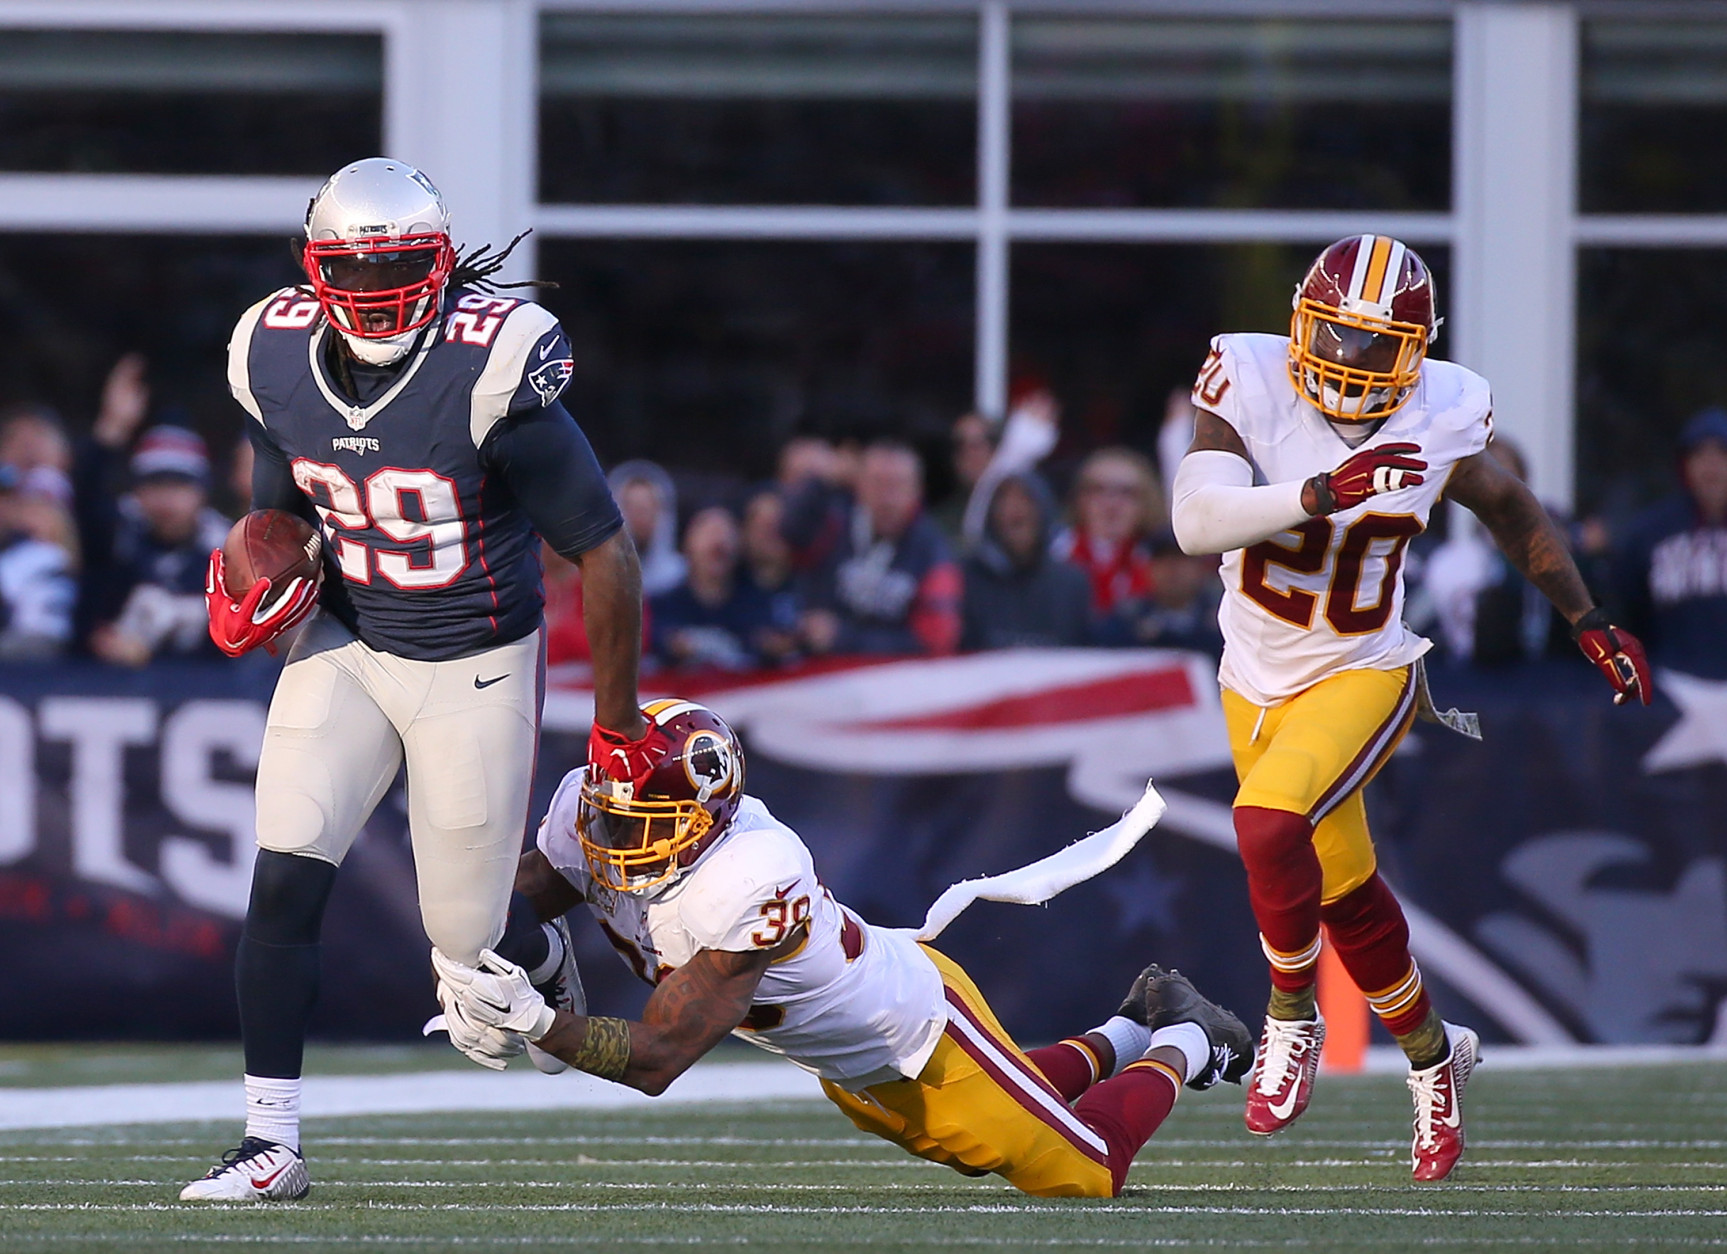 FOXBORO, MA - NOVEMBER 8: LeGarrette Blount #29 of the New England Patriots runs by Dashon Goldson #38 and Jeron Johnson #20 of the Washington Redskins in the second half at Gillette Stadium on November 8, 2015 in Foxboro, Massachusetts. (Photo by Jim Rogash/Getty Images)